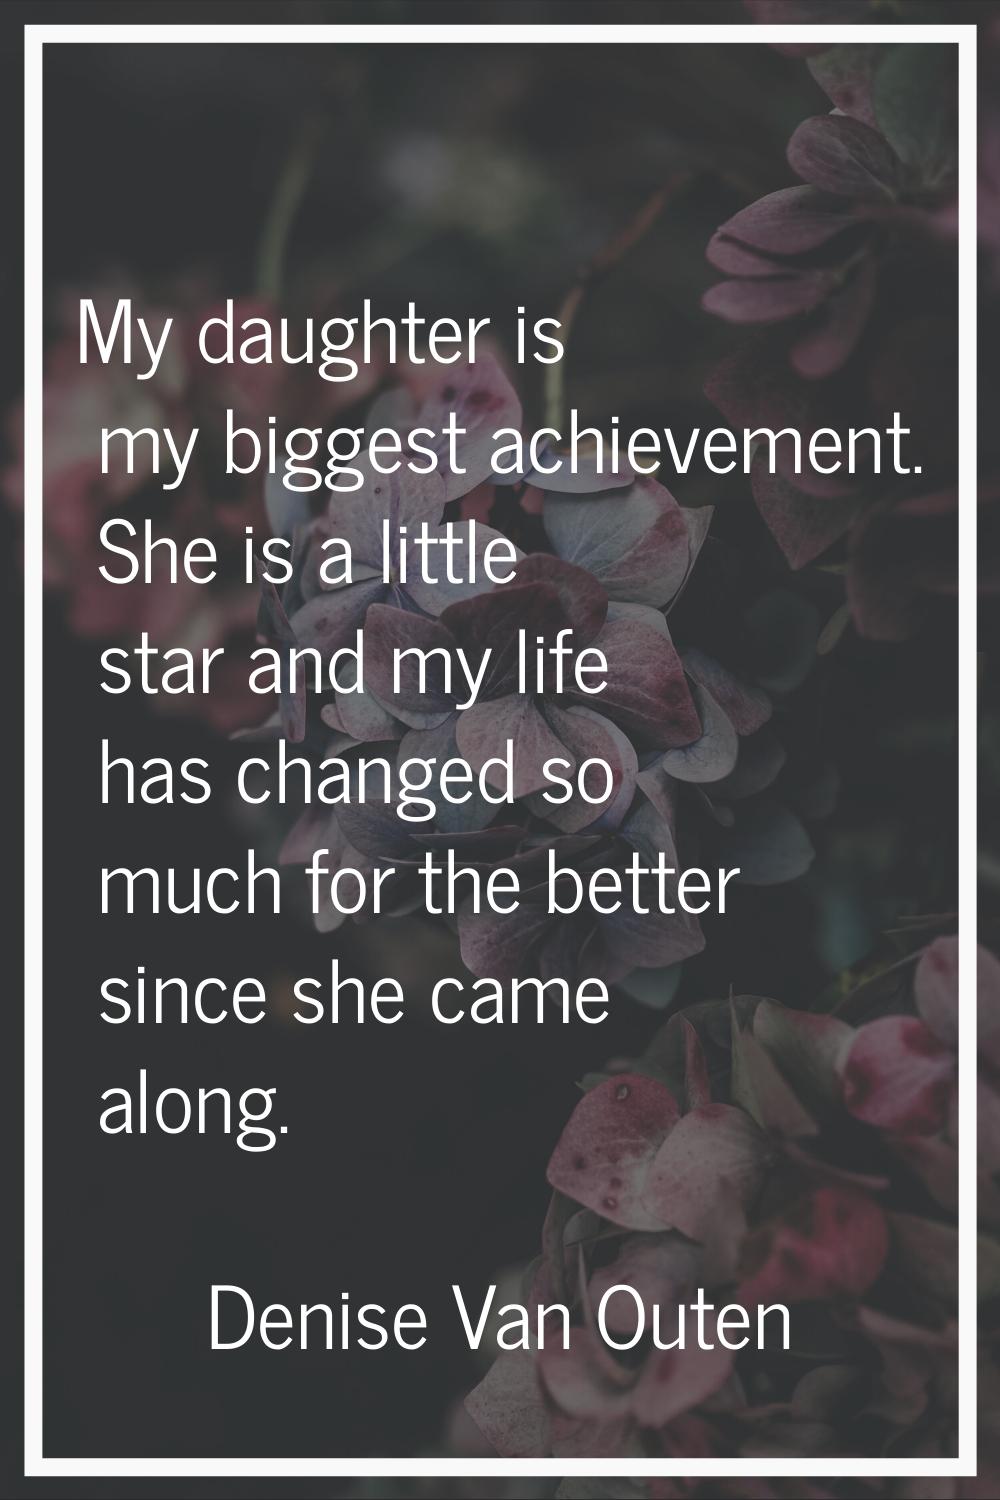 My daughter is my biggest achievement. She is a little star and my life has changed so much for the